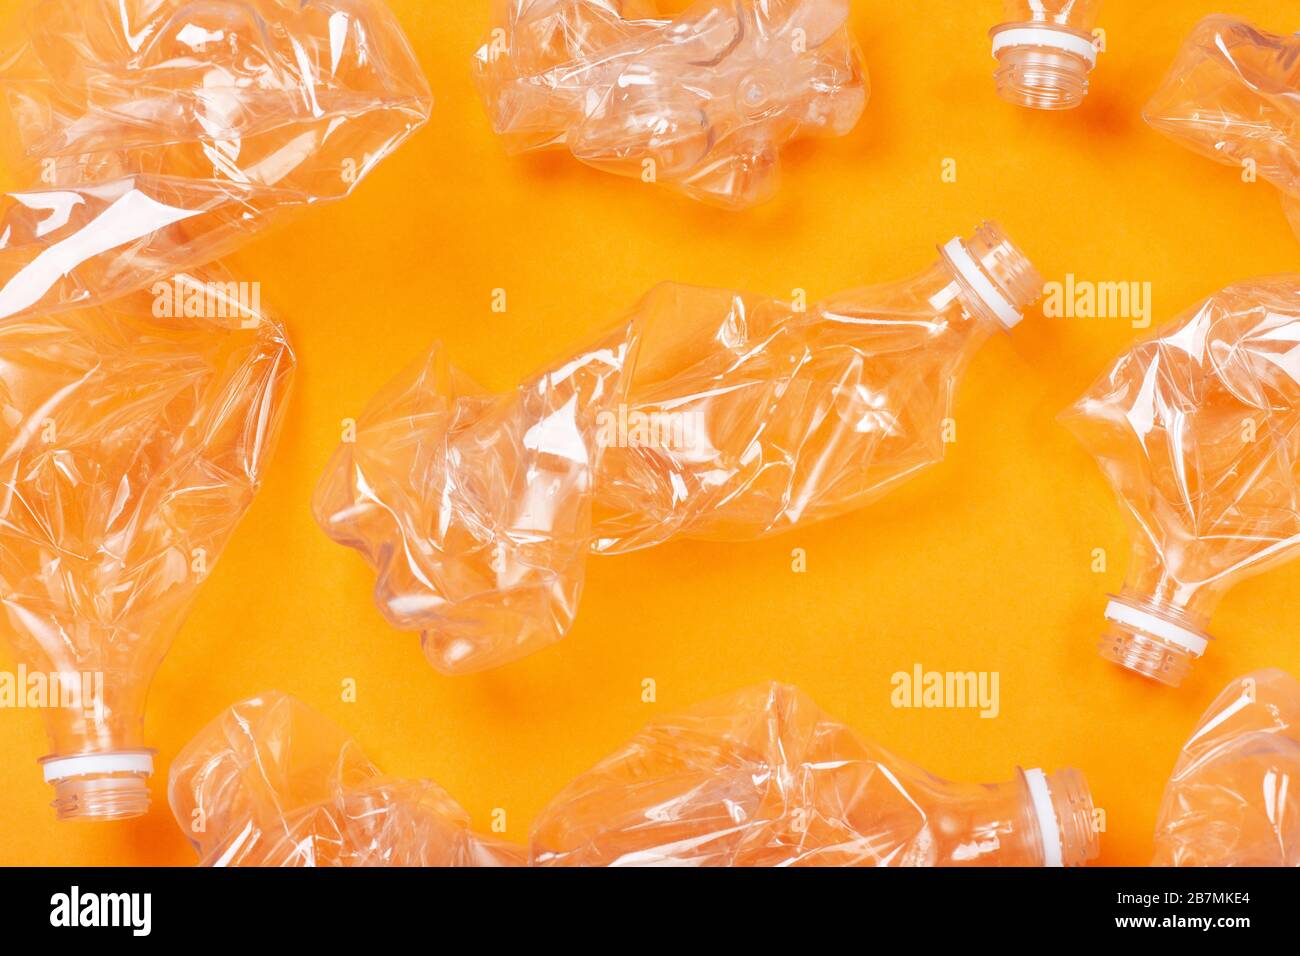 A lot of used plastic bottles on orange background. The concept of pollution of the planet and the oceans with plastic waste. Stock Photo